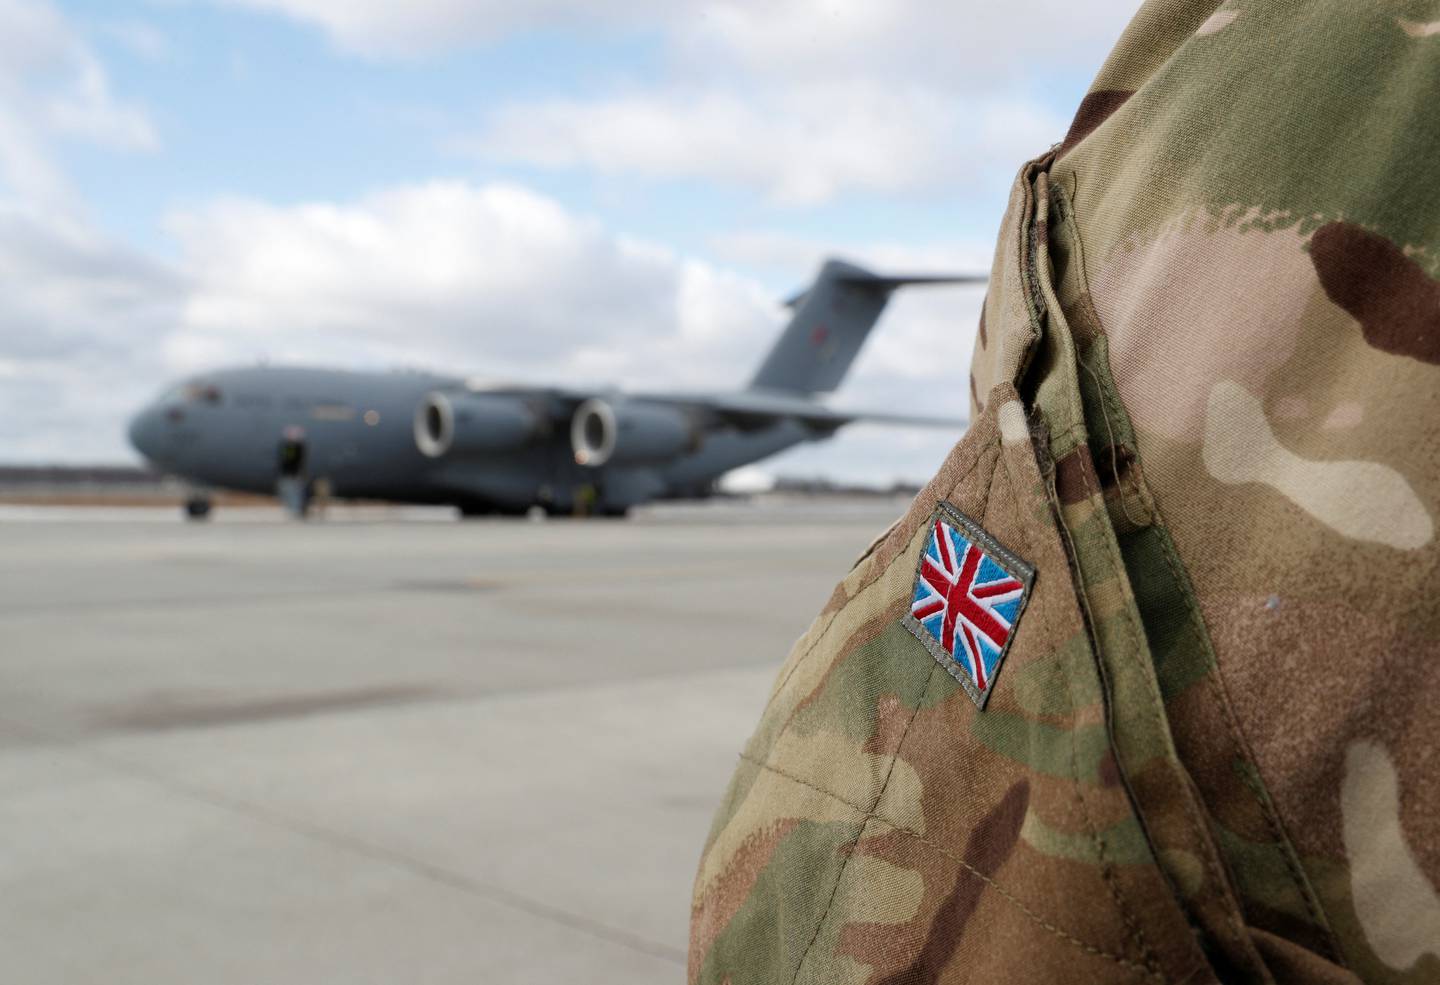 A C17 Globemaster III aircraft of the Royal Air Force, carrying a shipment of Britain's support package for Ukraine, on the tarmac at Kiev's main airport. Reuters